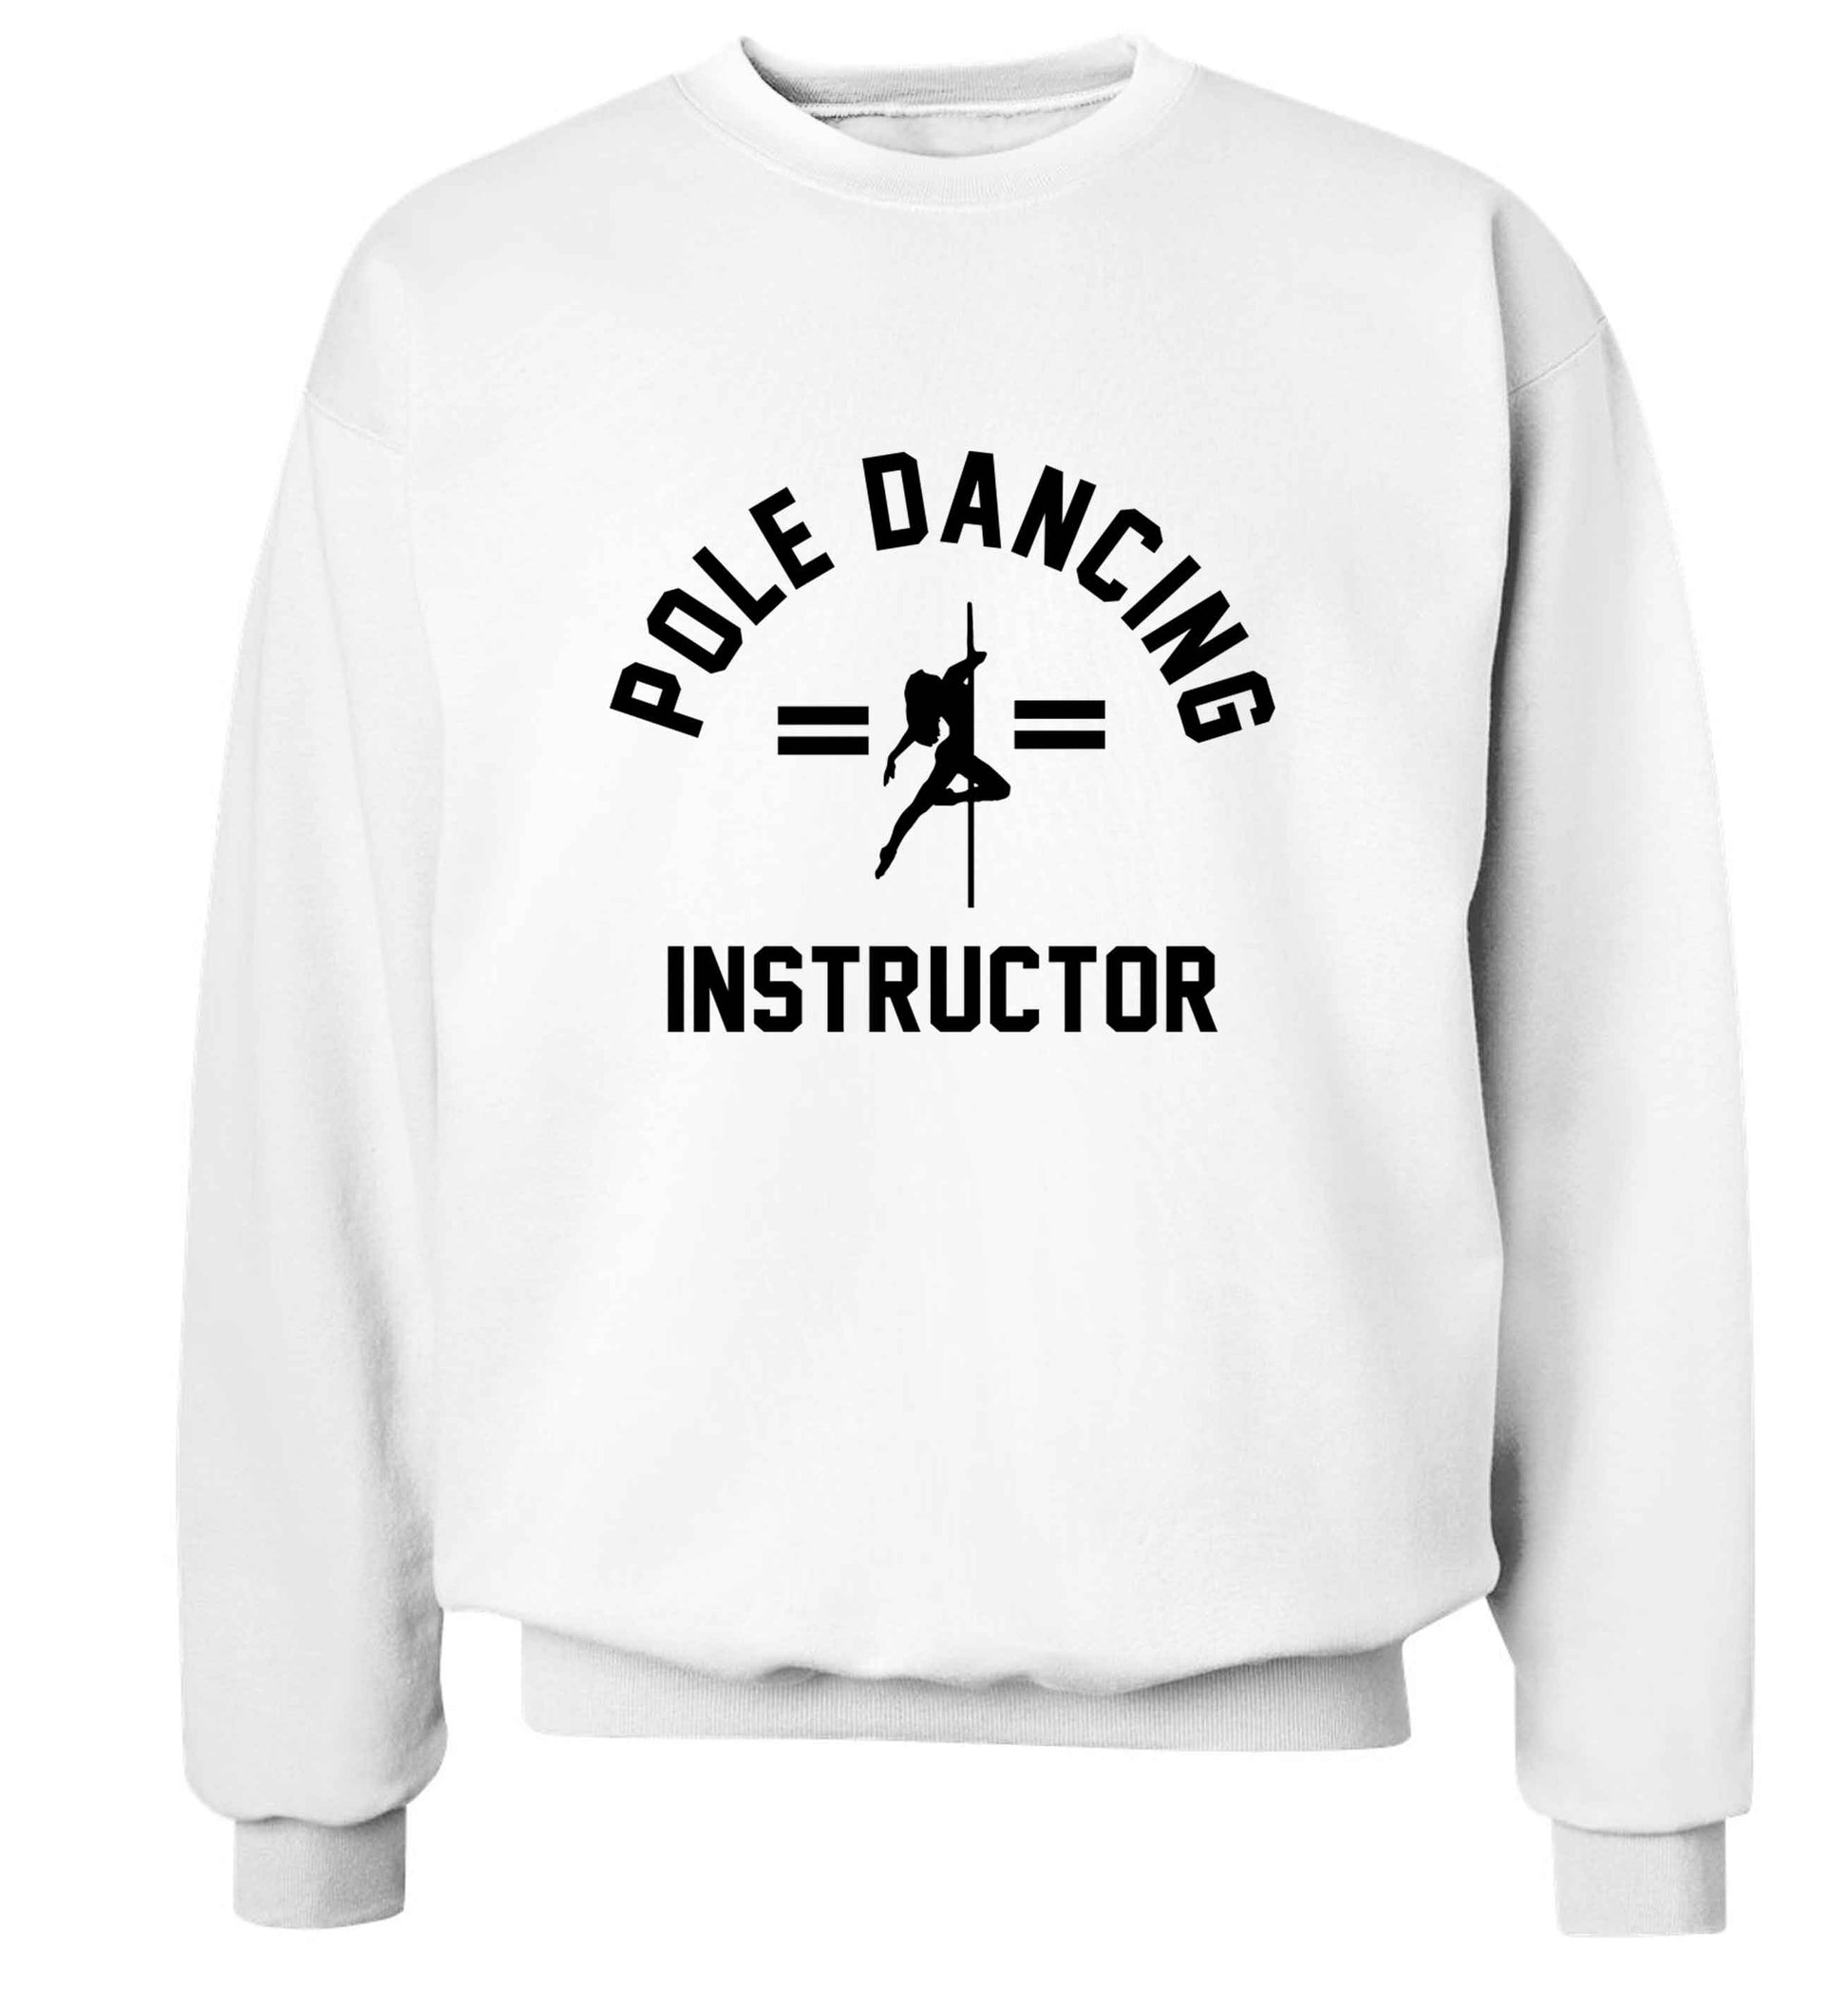 Pole dancing instructor adult's unisex white sweater 2XL